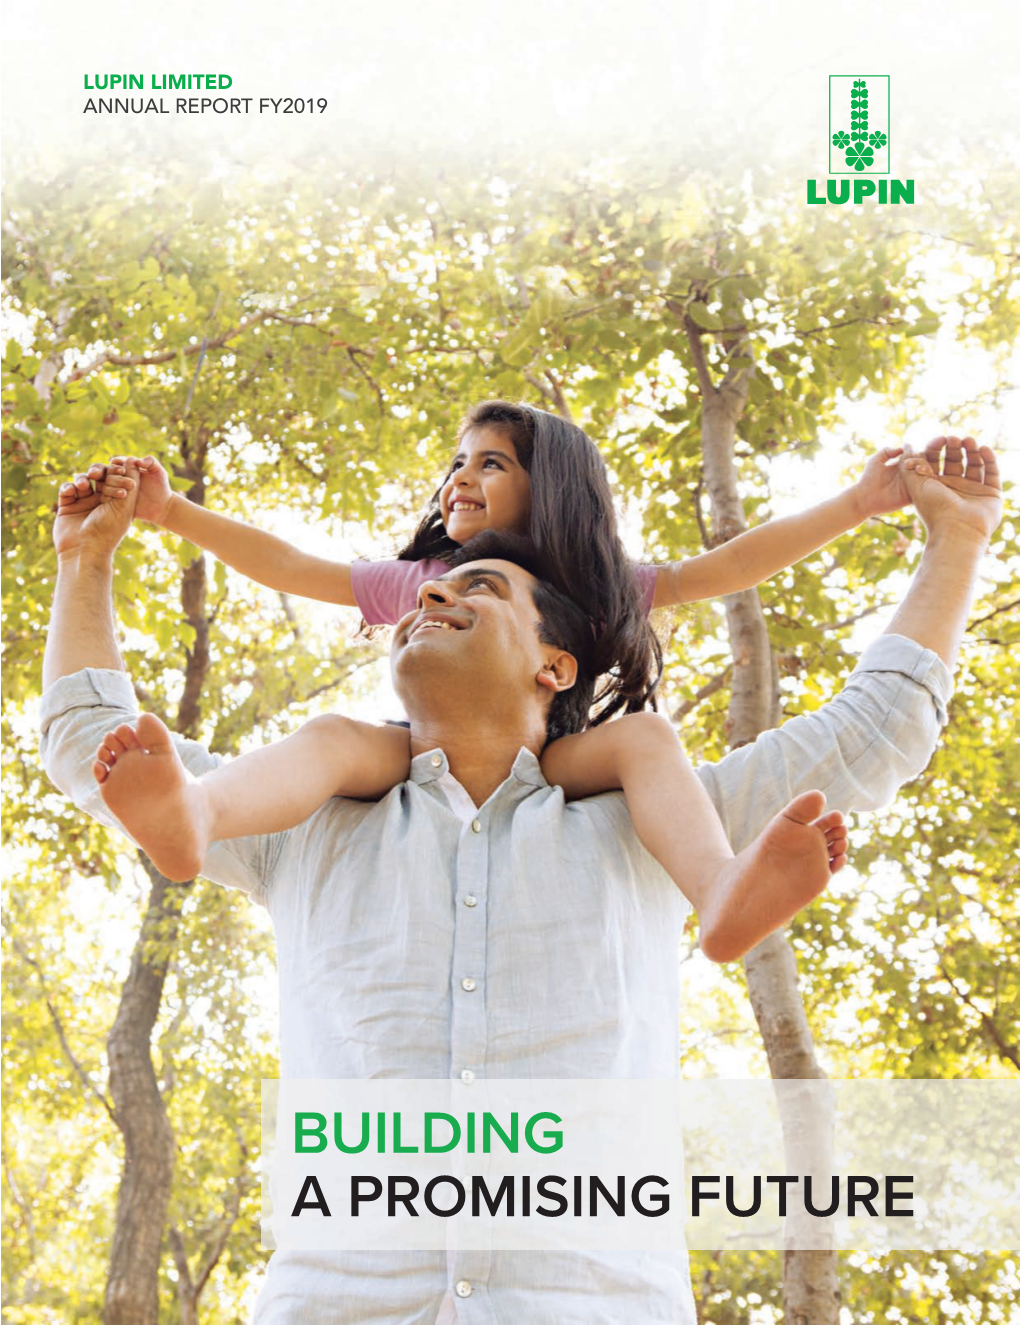 Lupin Limited Annual Report Fy2019